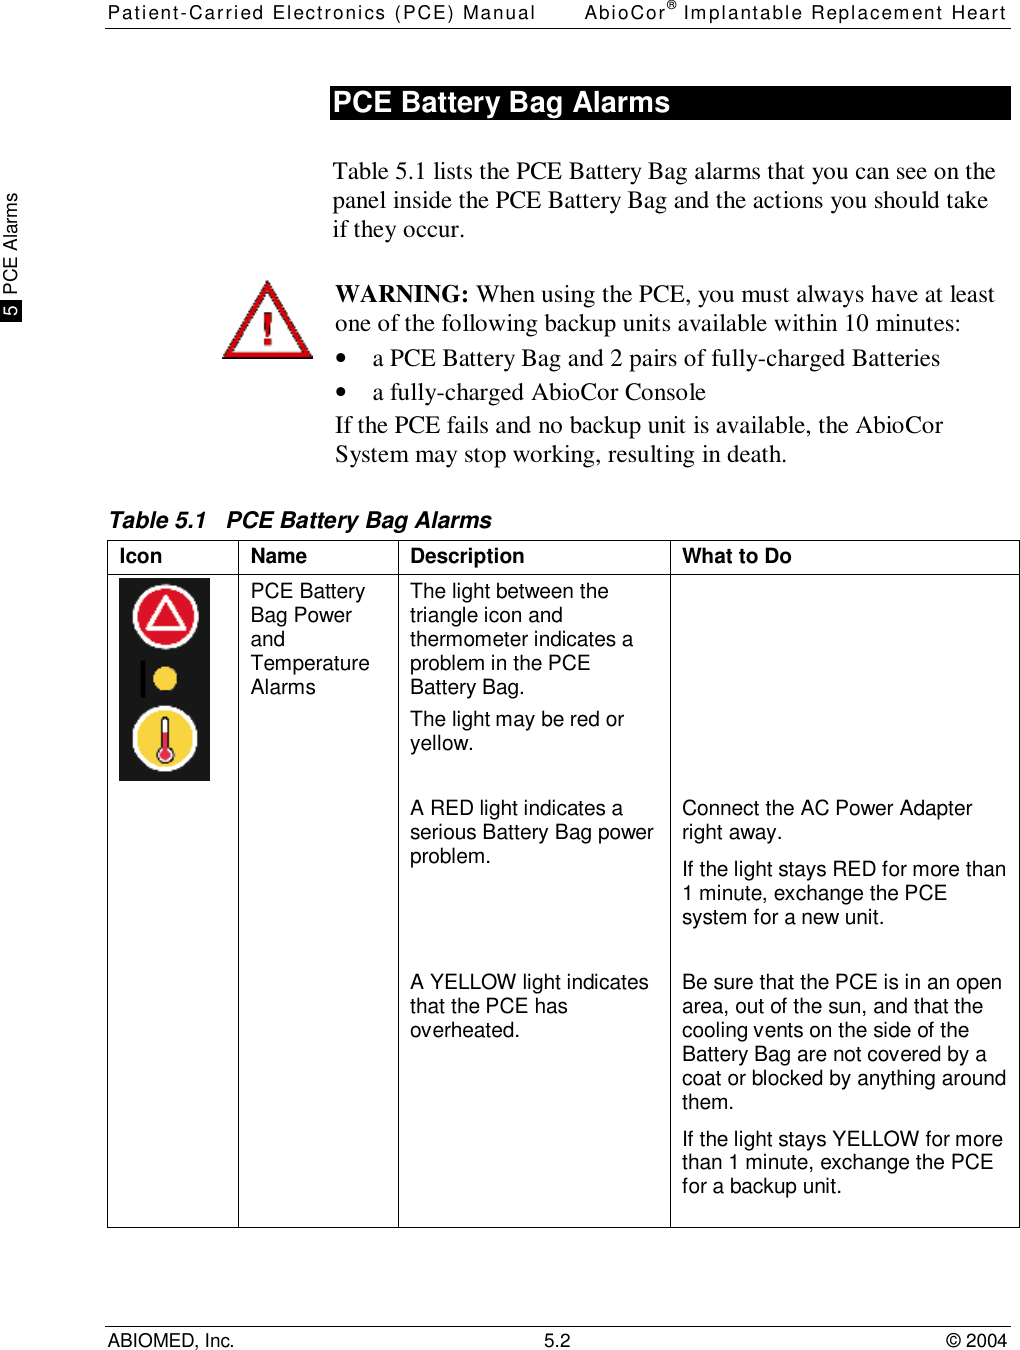 Patient-Carried Electronics (PCE) Manual AbioCor® Implantable Replacement HeartABIOMED, Inc. 5.2 © 2004 5  PCE AlarmsPCE Battery Bag AlarmsTable 5.1 lists the PCE Battery Bag alarms that you can see on thepanel inside the PCE Battery Bag and the actions you should takeif they occur.WARNING: When using the PCE, you must always have at leastone of the following backup units available within 10 minutes:• a PCE Battery Bag and 2 pairs of fully-charged Batteries• a fully-charged AbioCor ConsoleIf the PCE fails and no backup unit is available, the AbioCorSystem may stop working, resulting in death.Table 5.1   PCE Battery Bag AlarmsIcon Name Description What to DoThe light between thetriangle icon andthermometer indicates aproblem in the PCEBattery Bag.The light may be red oryellow.A RED light indicates aserious Battery Bag powerproblem.Connect the AC Power Adapterright away.If the light stays RED for more than1 minute, exchange the PCEsystem for a new unit.PCE BatteryBag PowerandTemperatureAlarmsA YELLOW light indicatesthat the PCE hasoverheated.Be sure that the PCE is in an openarea, out of the sun, and that thecooling vents on the side of theBattery Bag are not covered by acoat or blocked by anything aroundthem.If the light stays YELLOW for morethan 1 minute, exchange the PCEfor a backup unit.